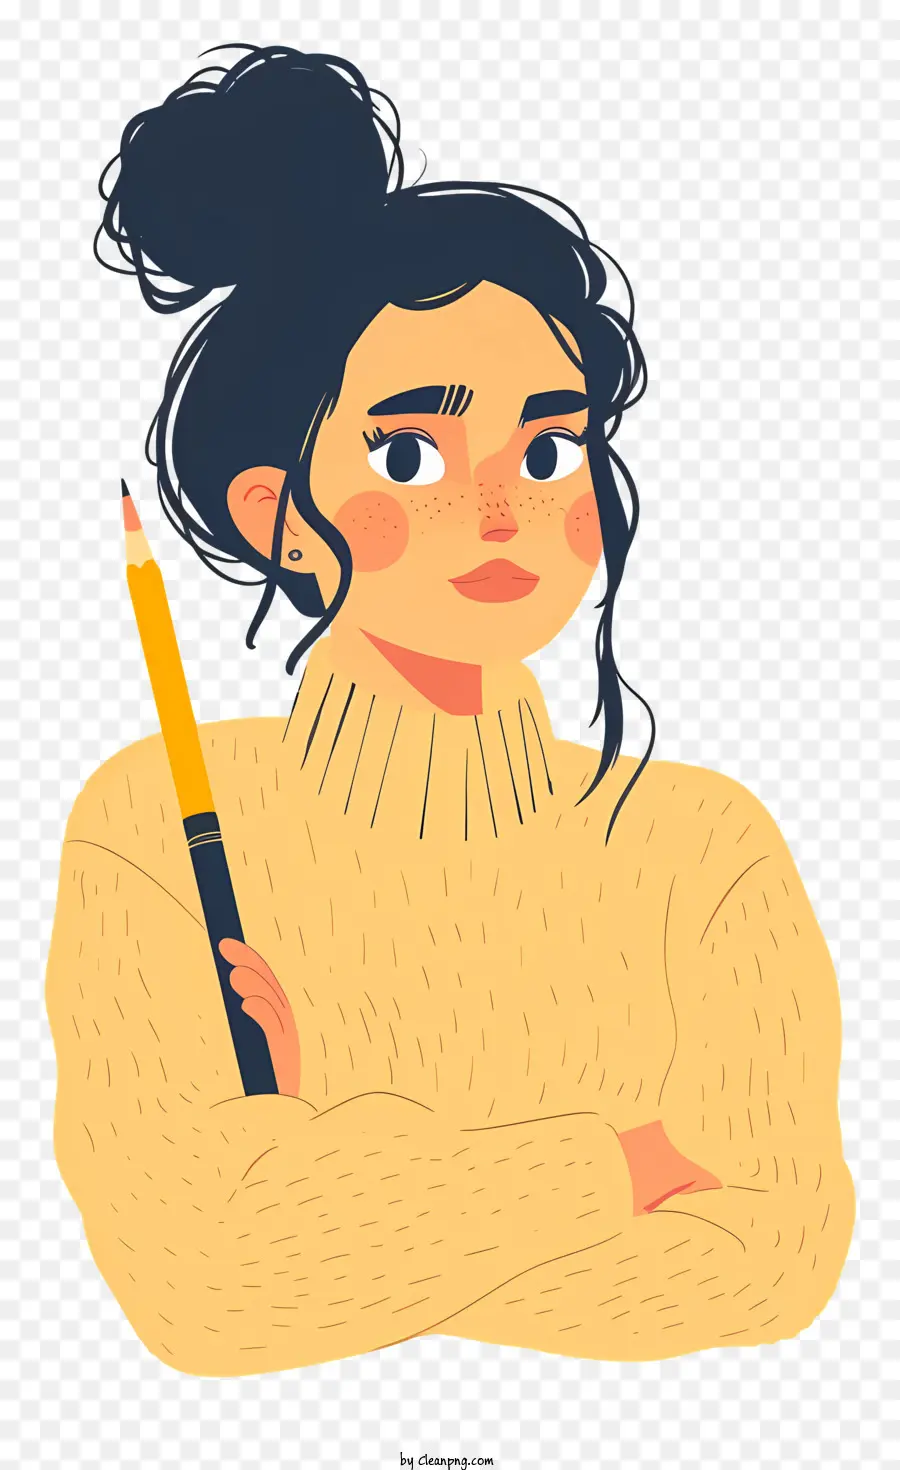 woman with pencil beige sweater pencil neutral facial expression black hair